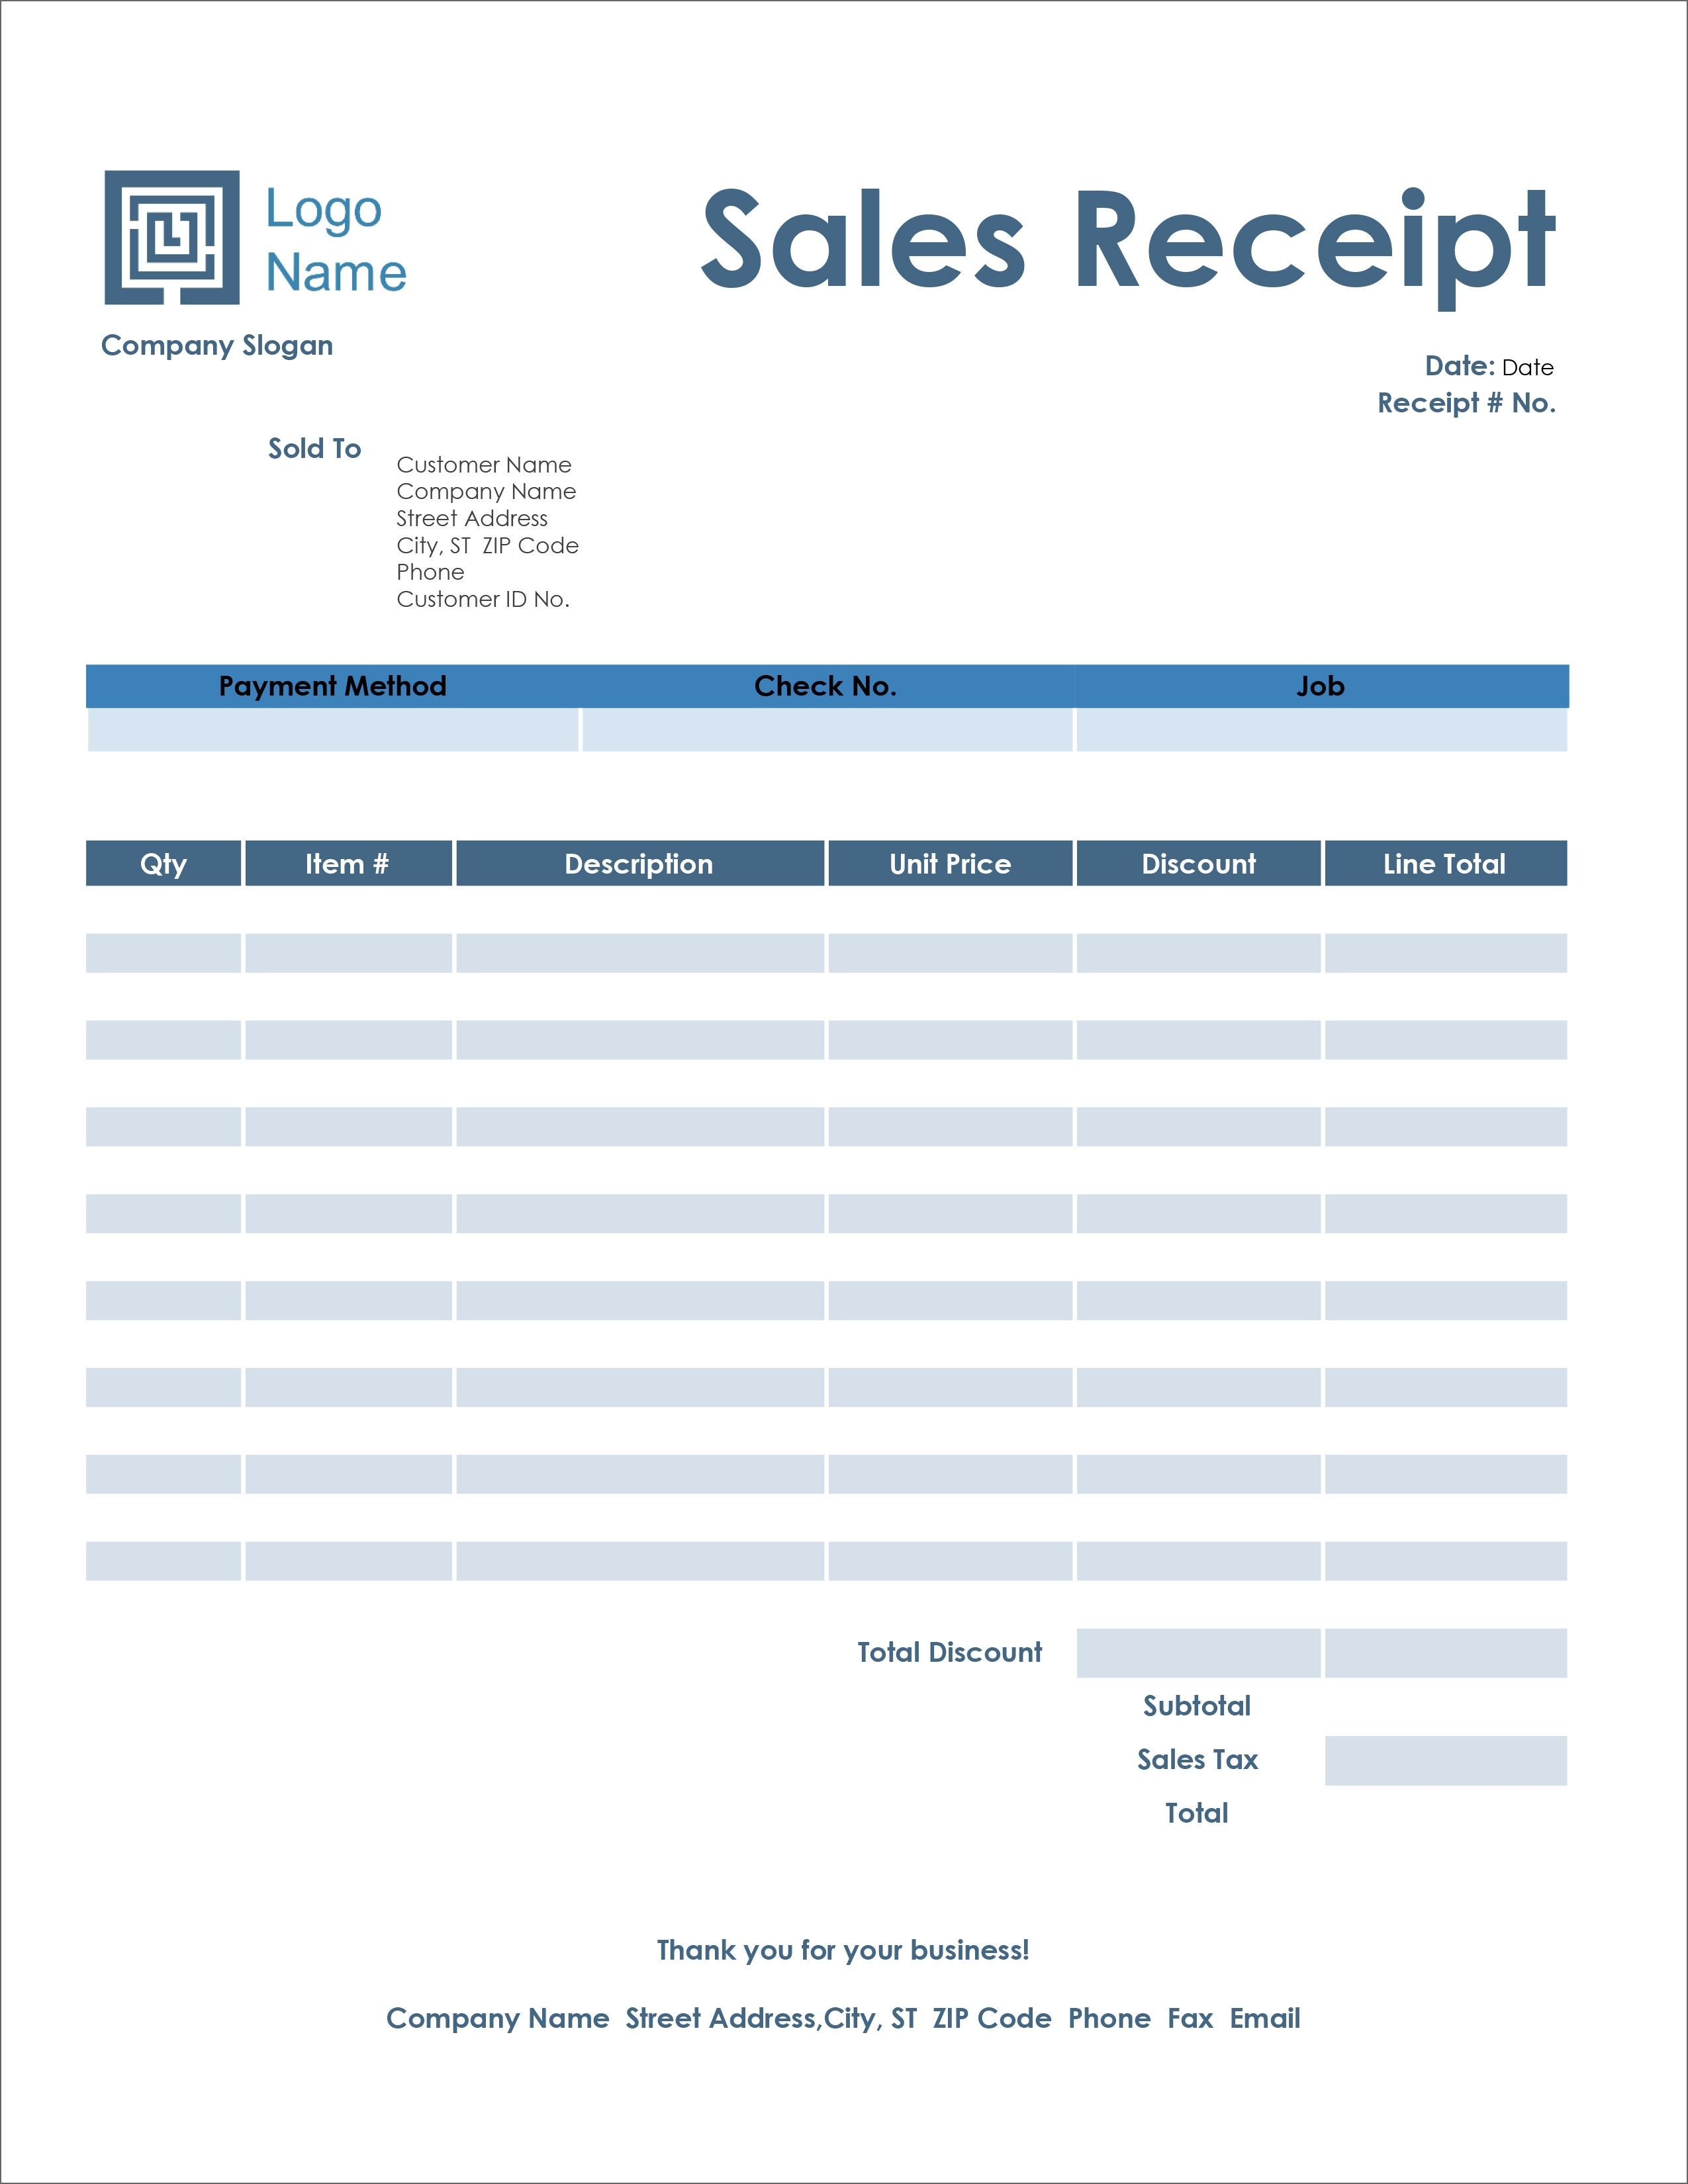 16 free receipt templates download for microsoft word sales receipt template microsoft word